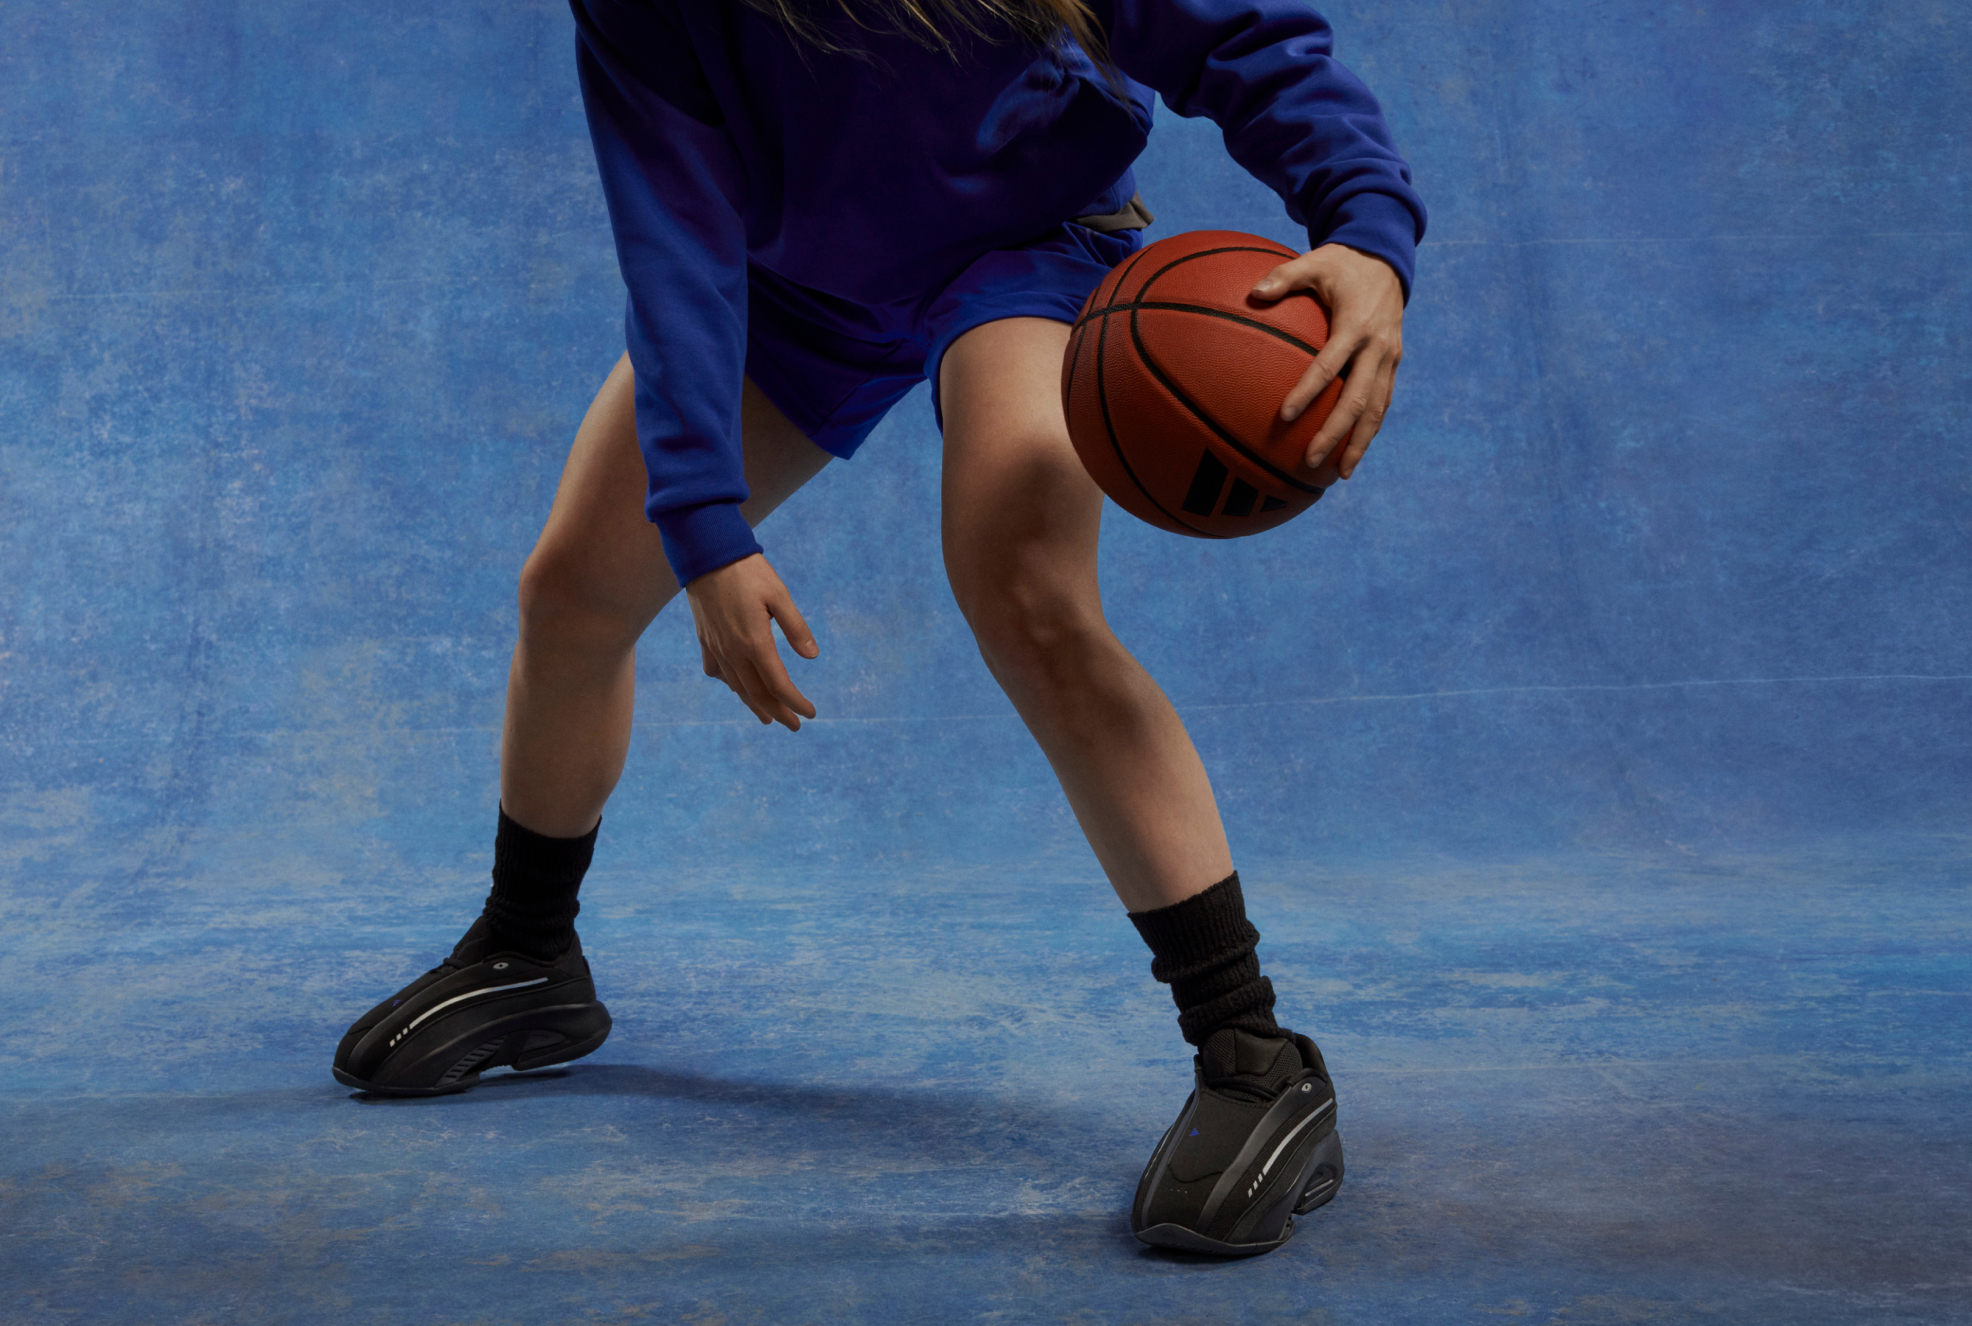 Close-up of person in a blue sweatshirt and shorts holding a basketball.